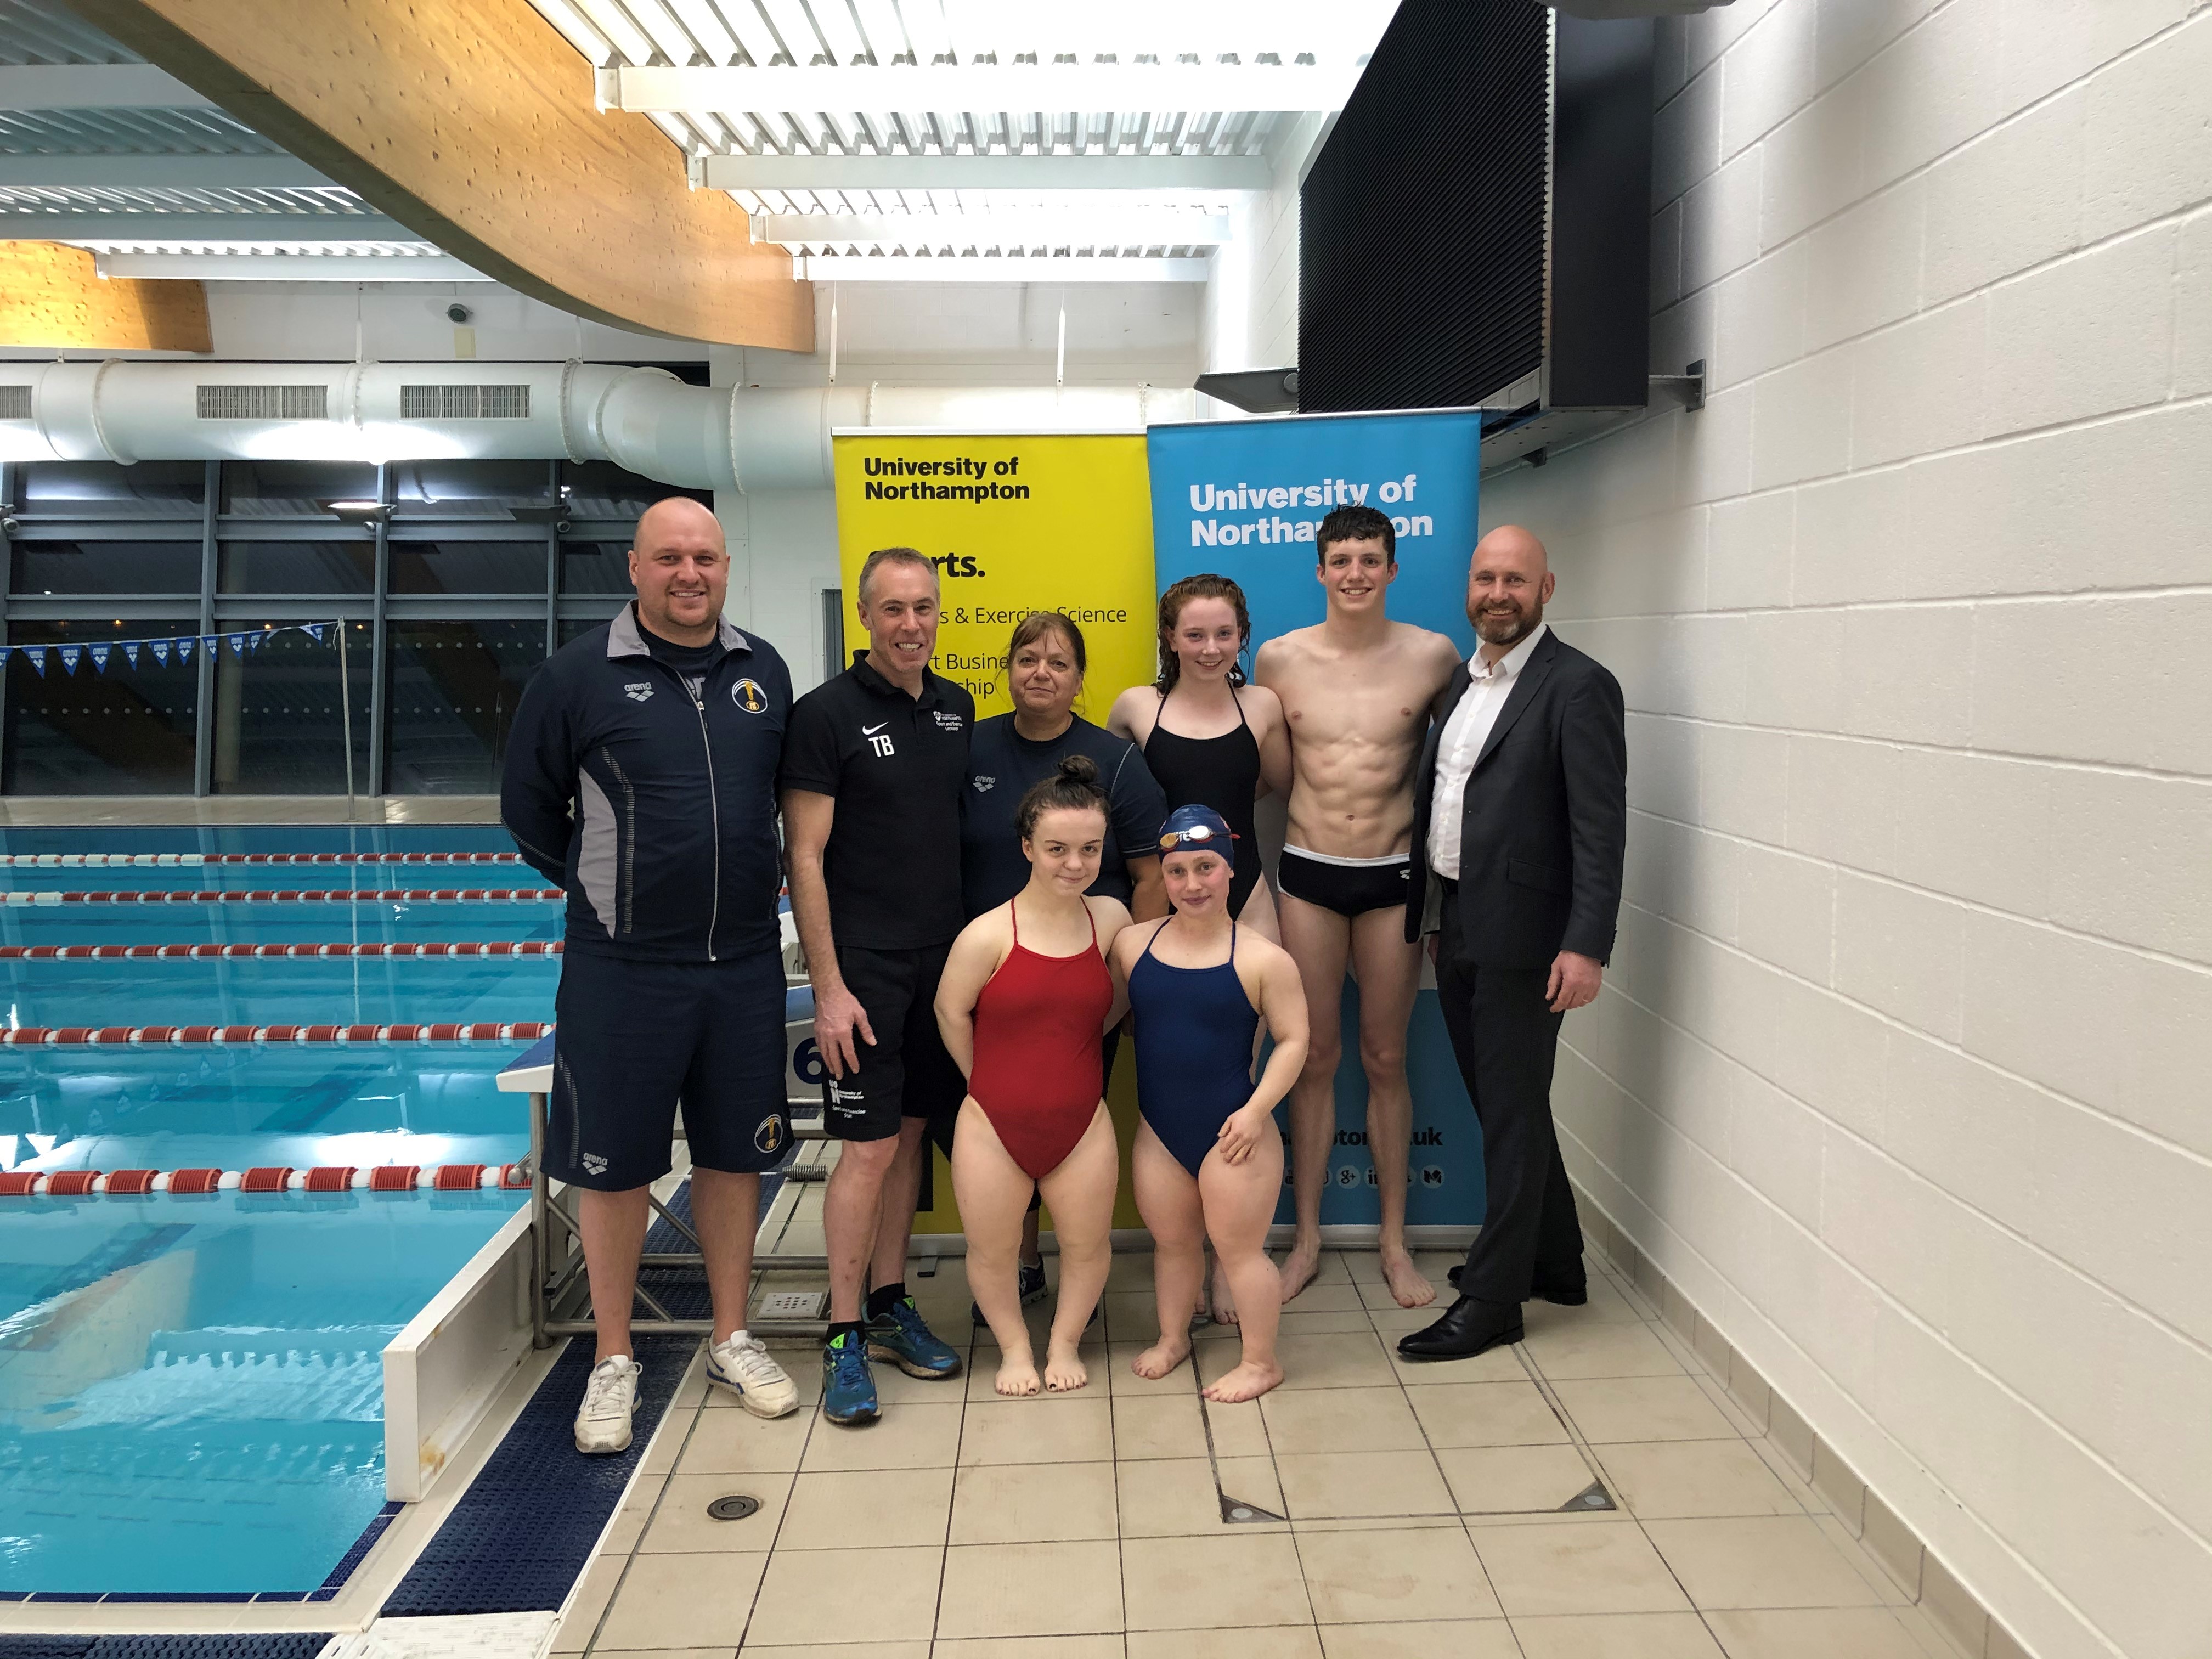 UON's Dr Peter Jones is pictured on the right with members of Northampton Swimming Club